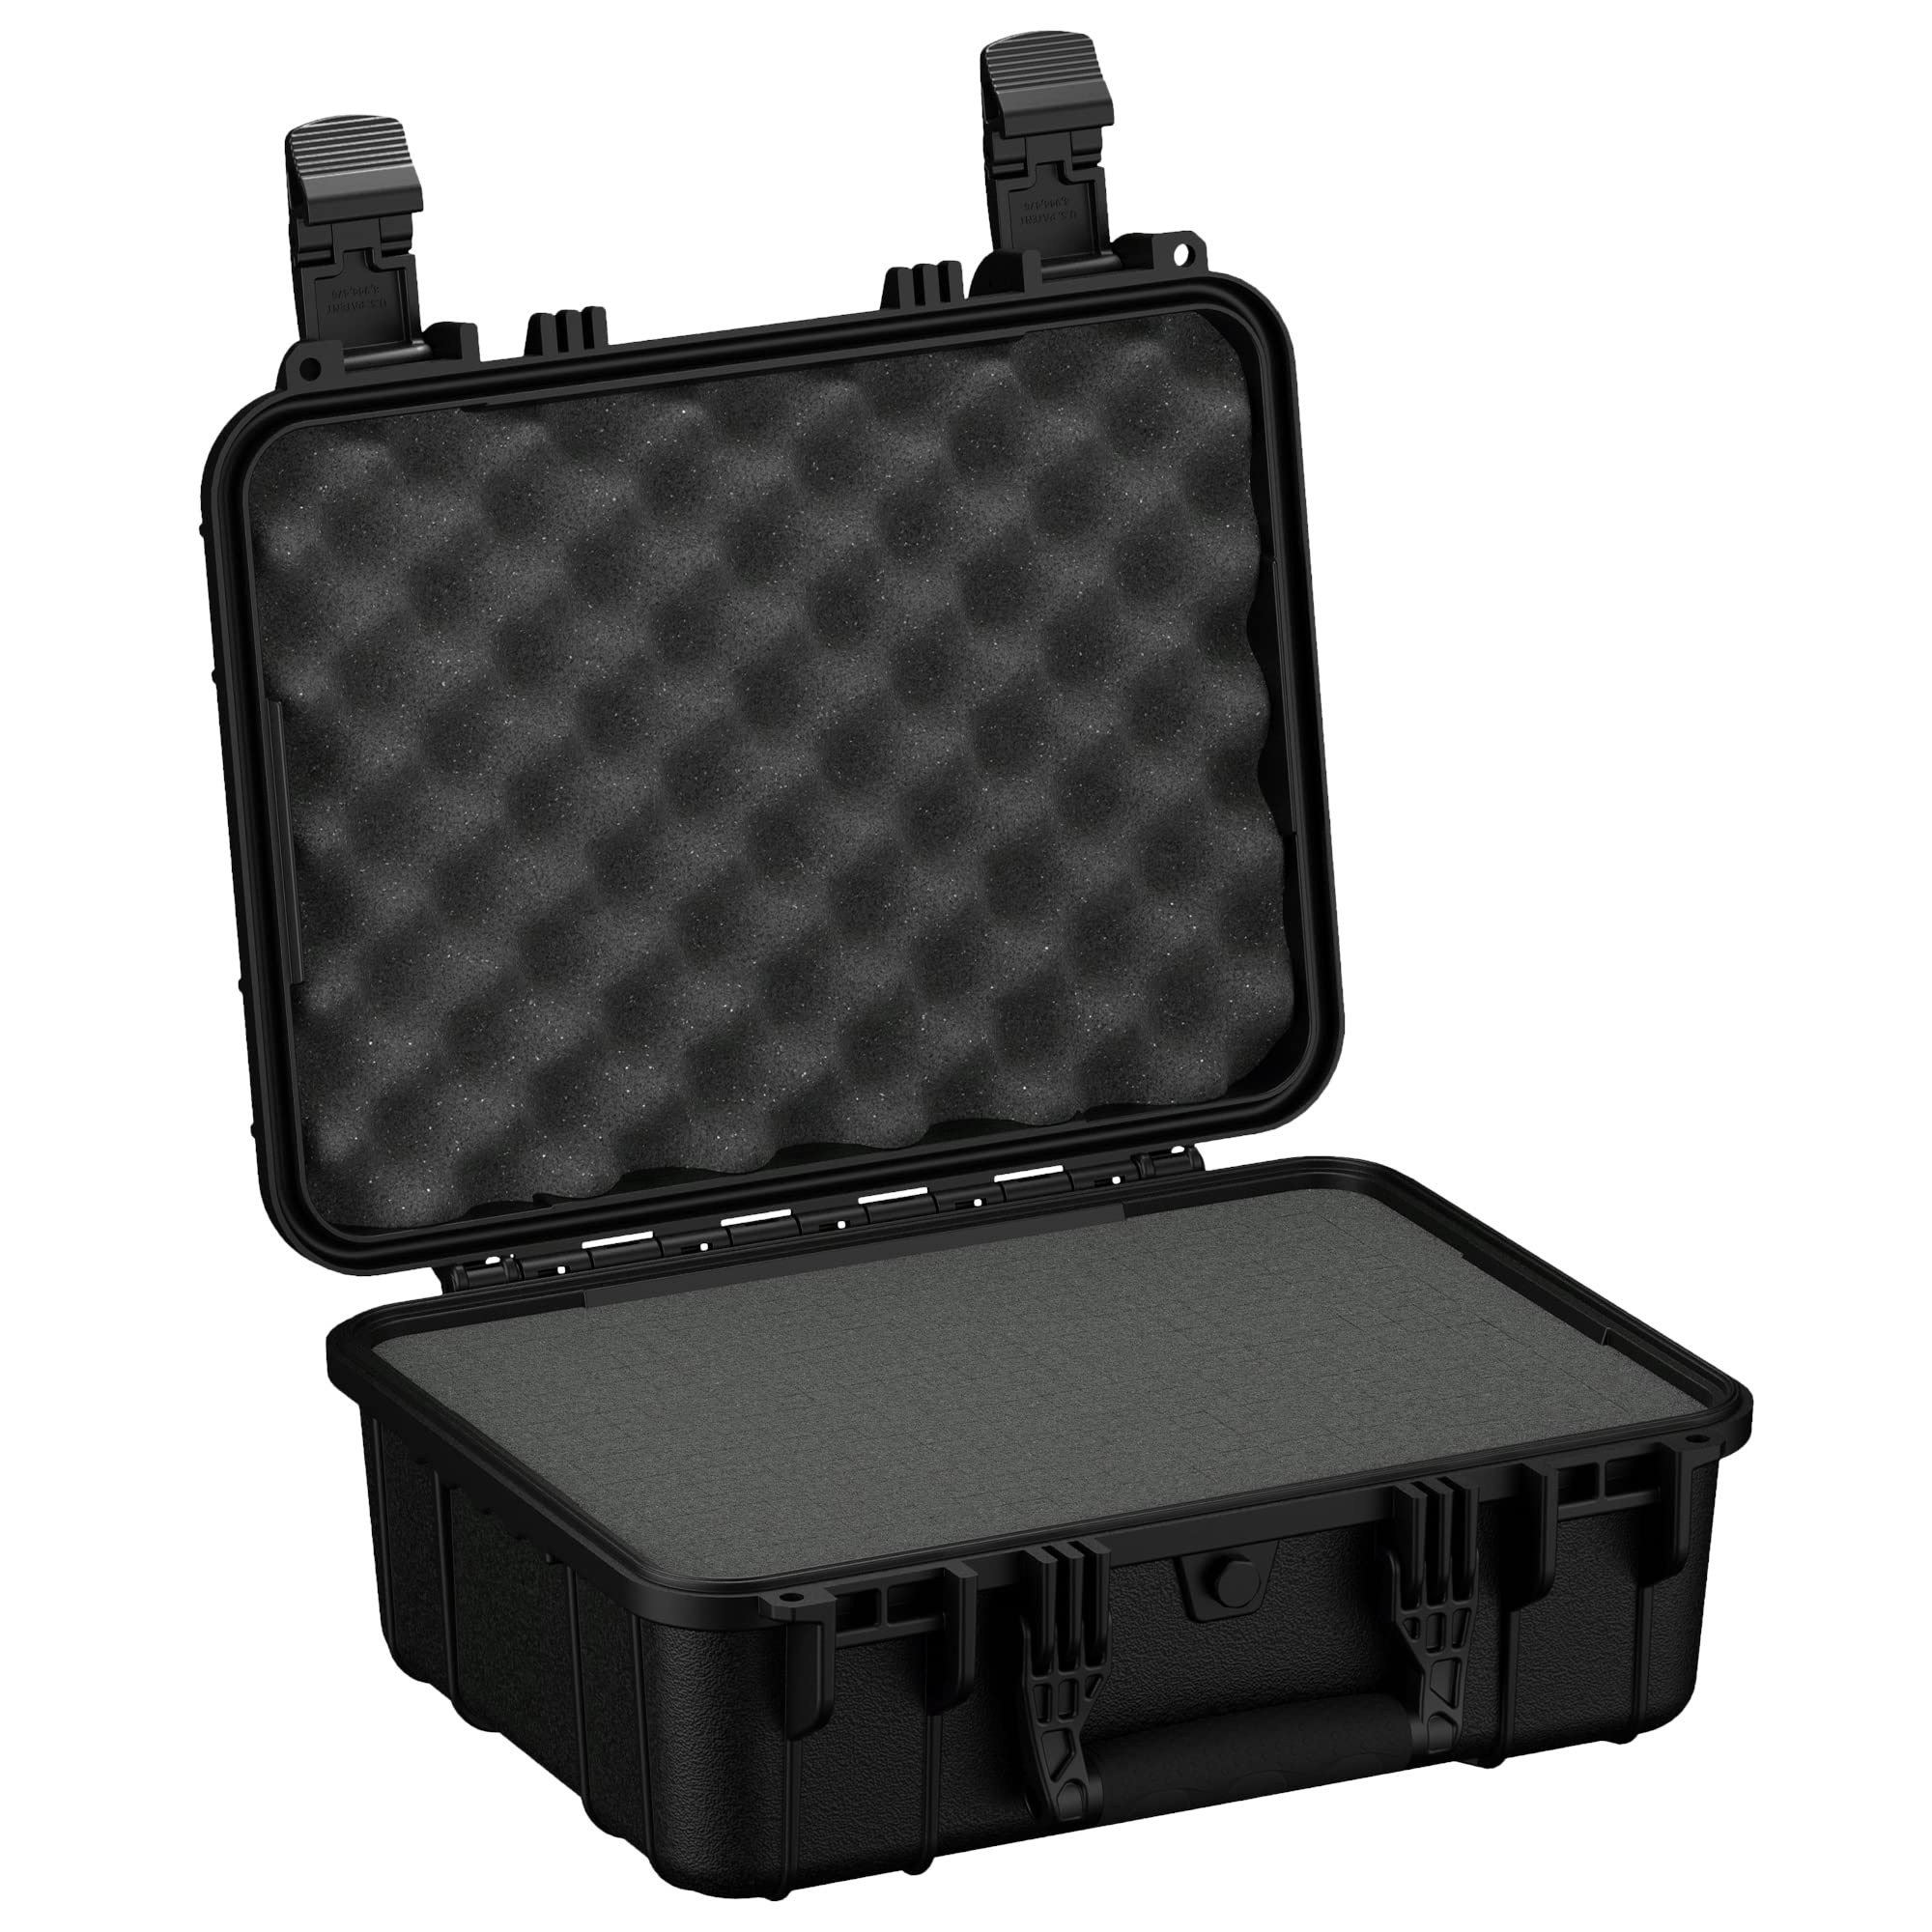 Condition 1 16 Medium Hard Case Lockable Storage Box, Waterproof Travel Plastic  Case, Protective Luggage with Customizable Foam, for Camera, Tactical,  Scientific Gear Storage IP67 #179, 16x13x7, Black